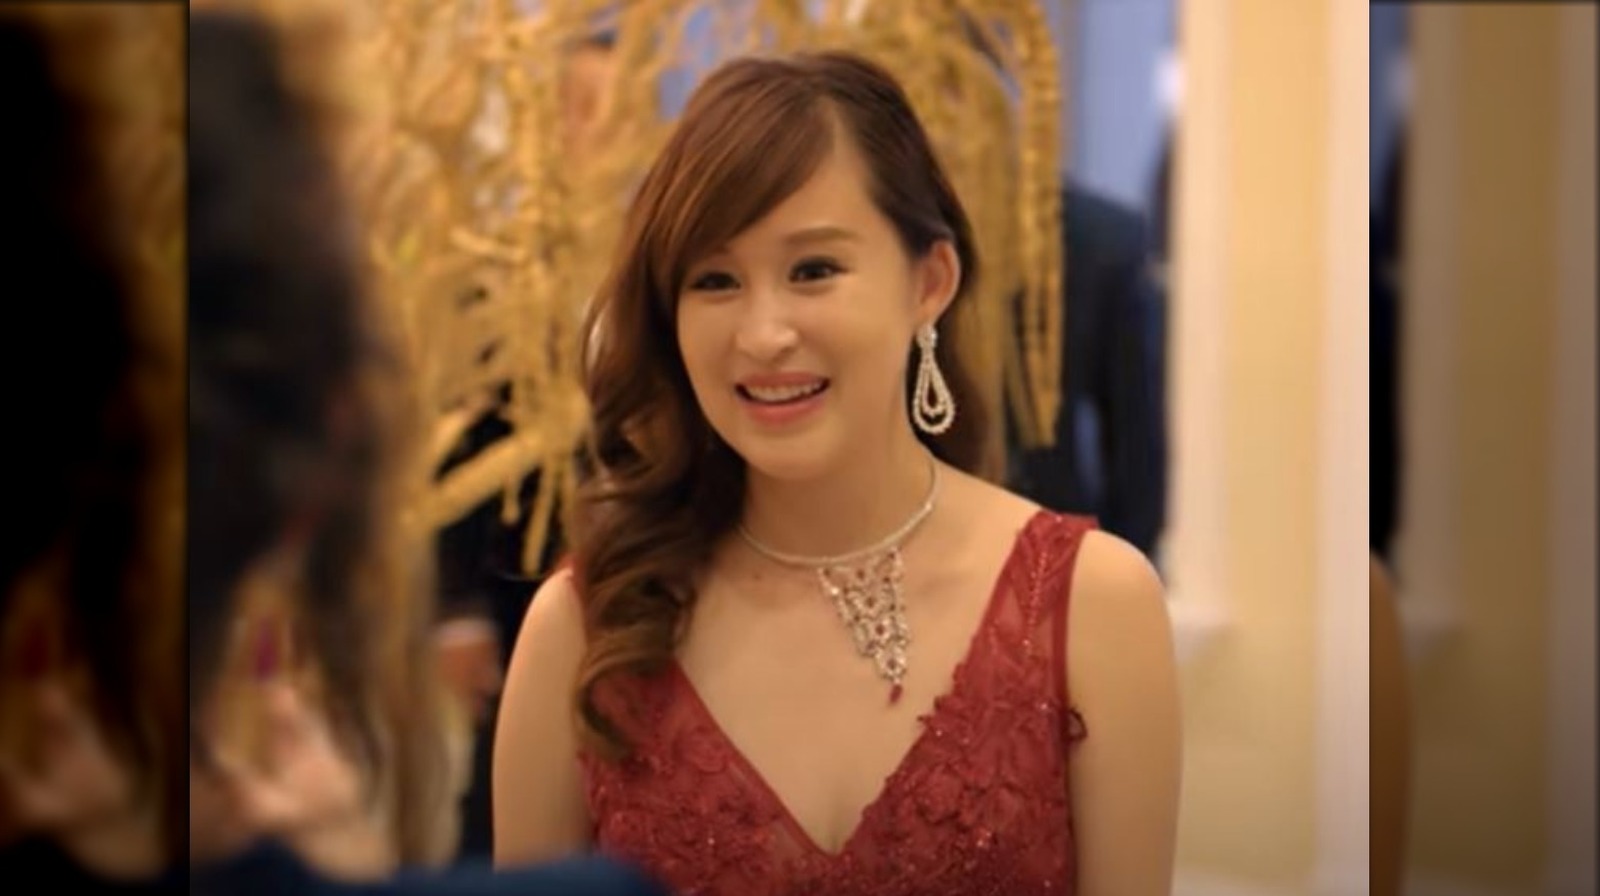 Who Is Cherie Chan From Bling Empire And What Is Her Net Worth?